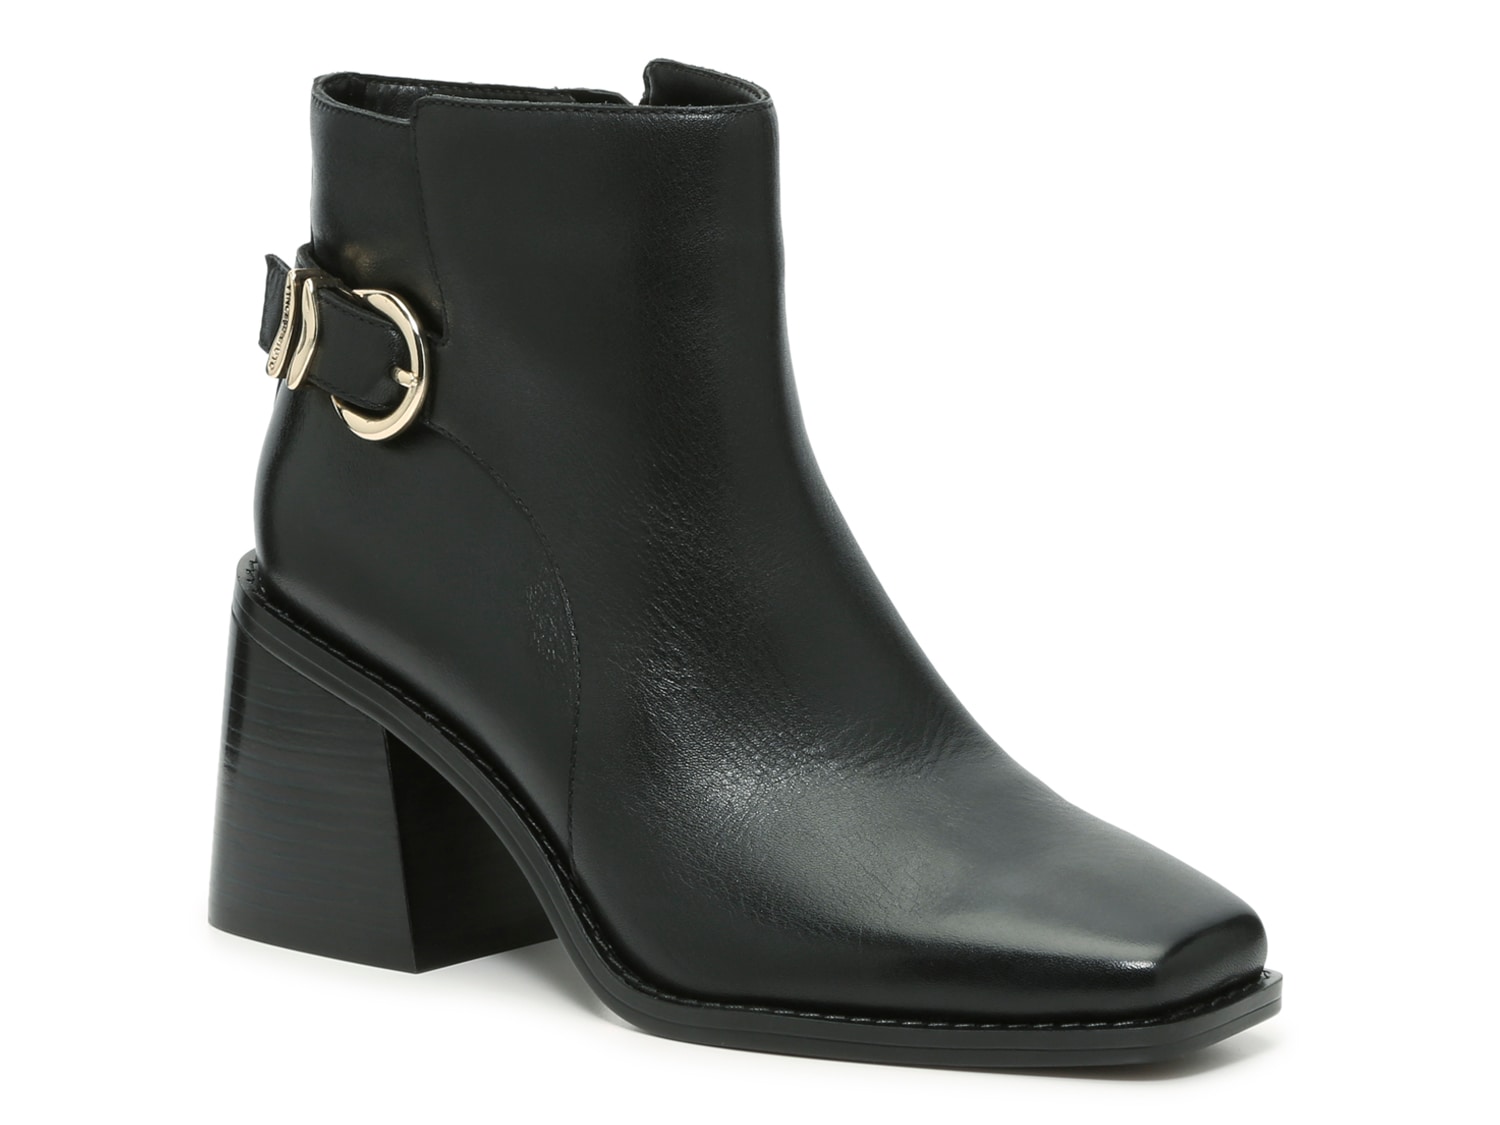 Vince Camuto Sameena Bootie - Free Shipping | DSW